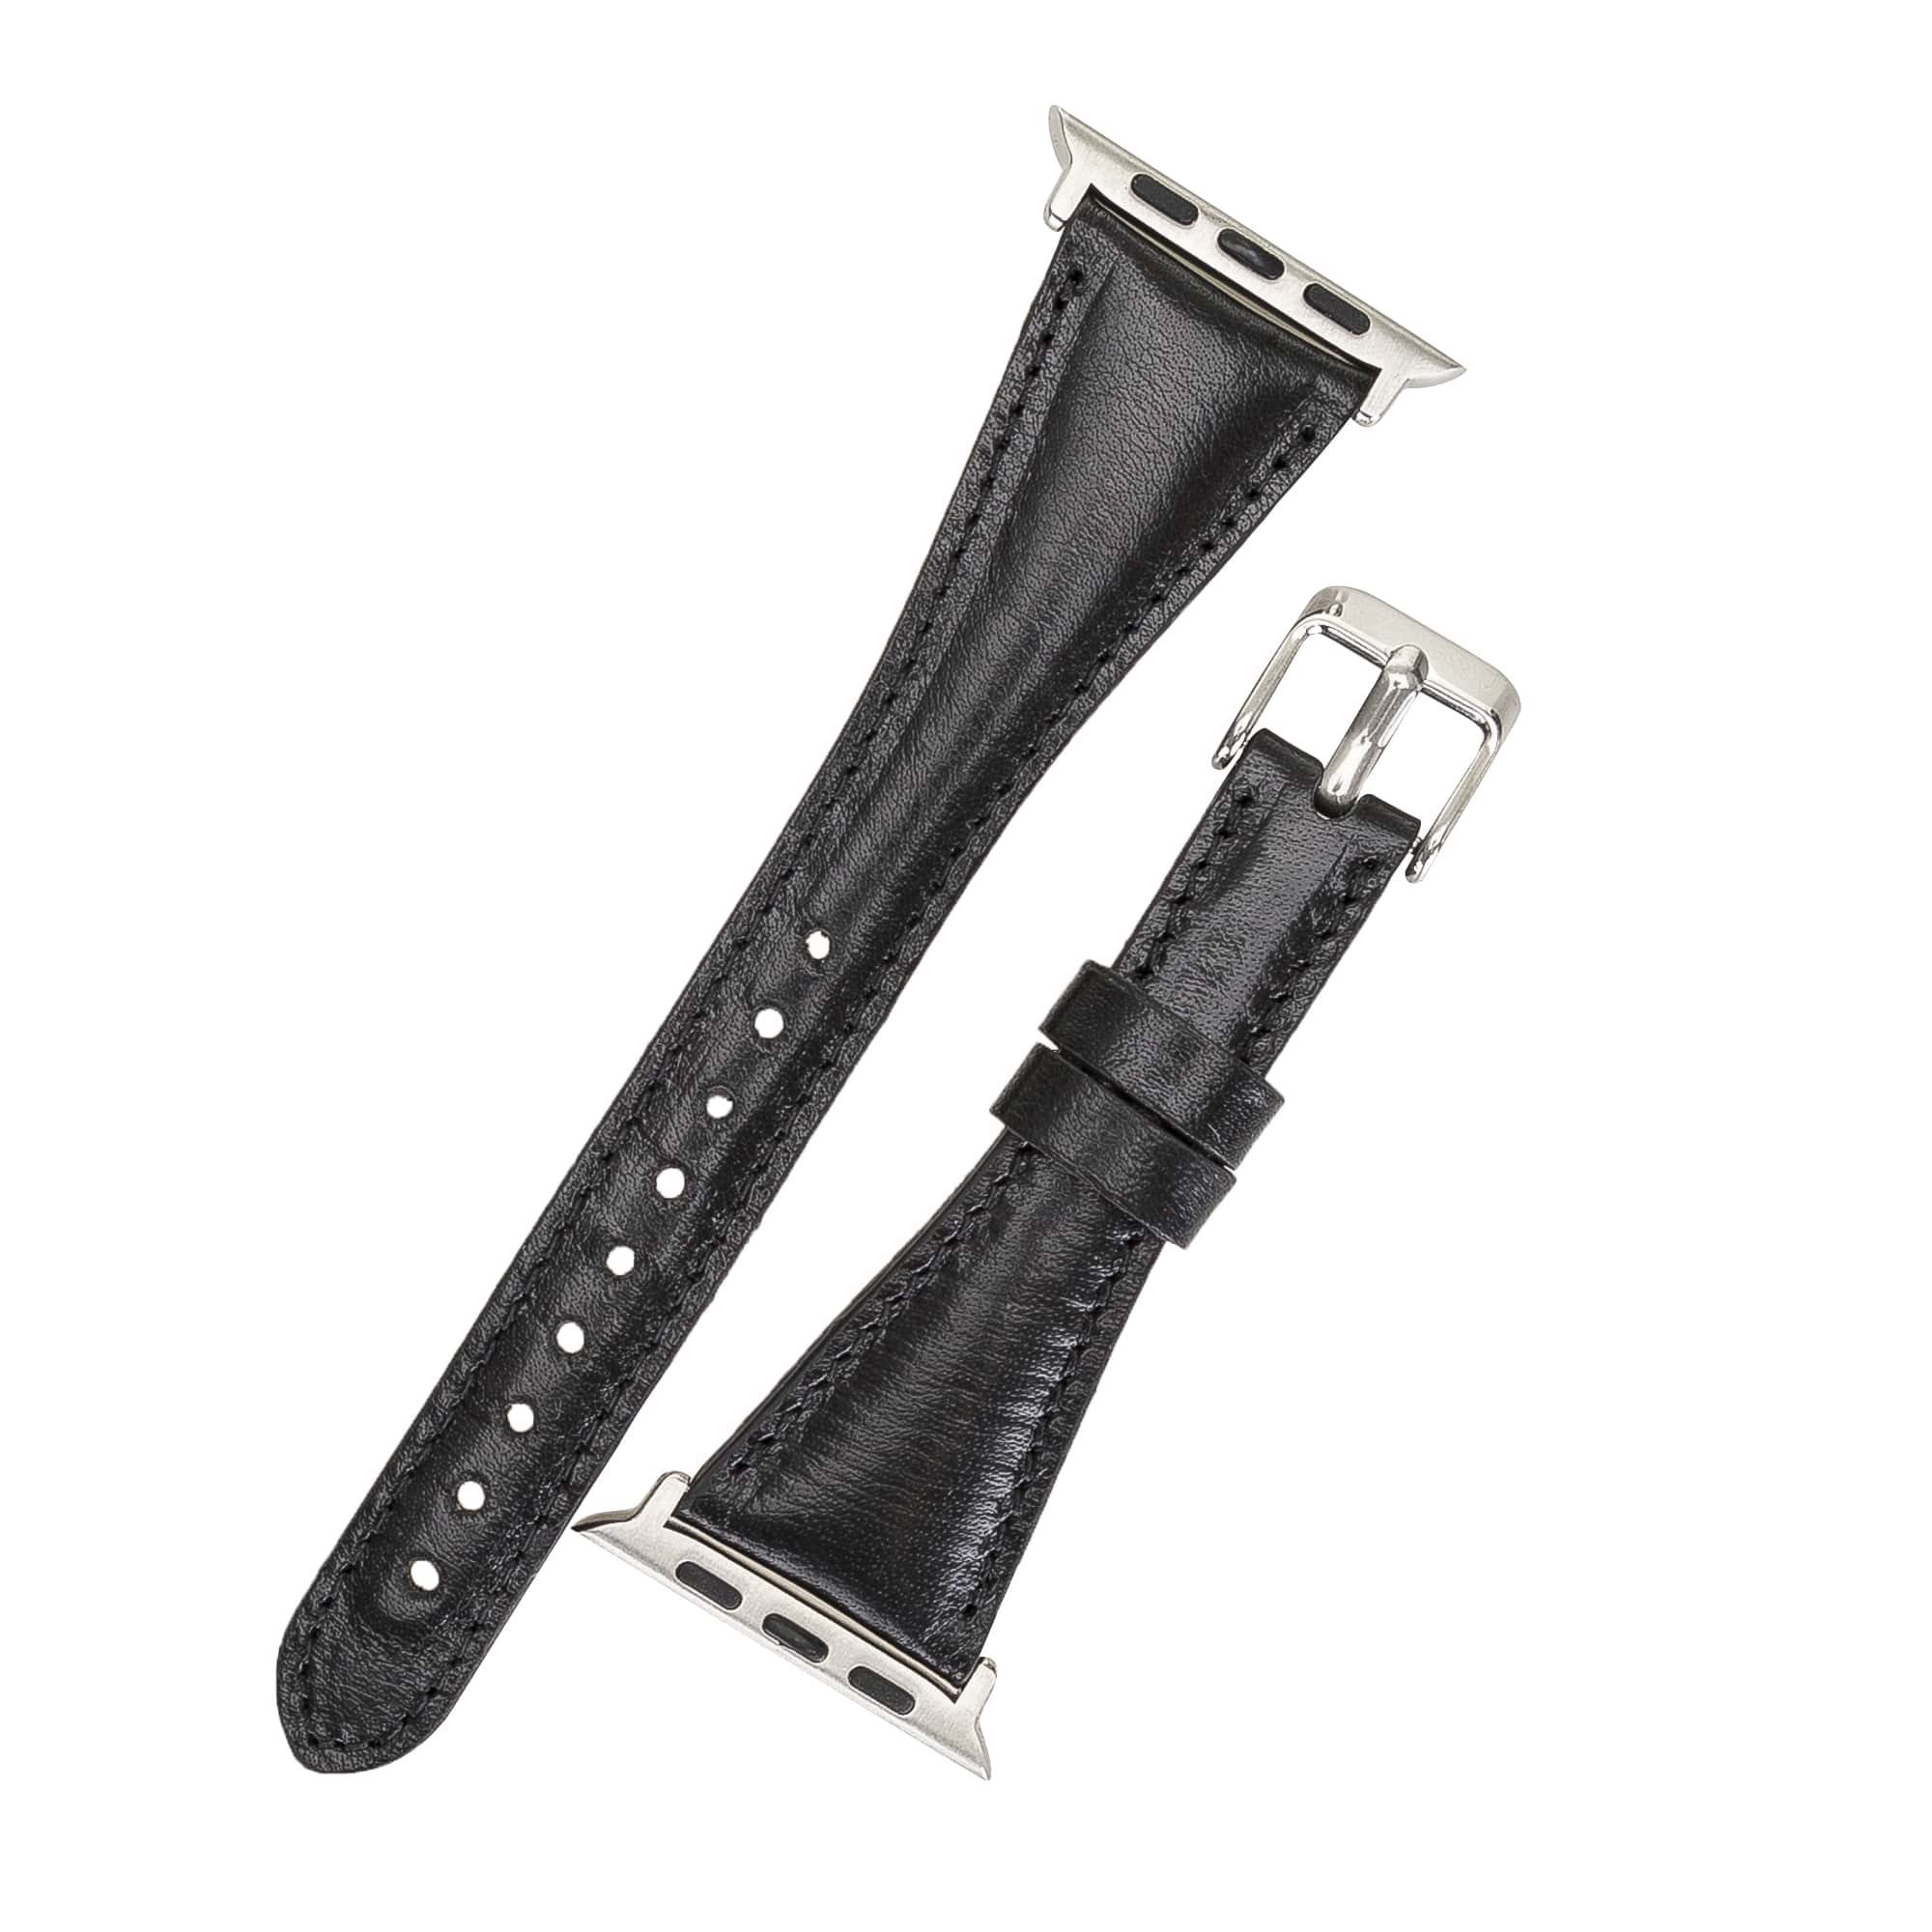 Buckingham Black Genuine Leather Apple Watch Band Strap 38mm 40mm 42mm 44mm 45mm for All Series - Bomonti - 3